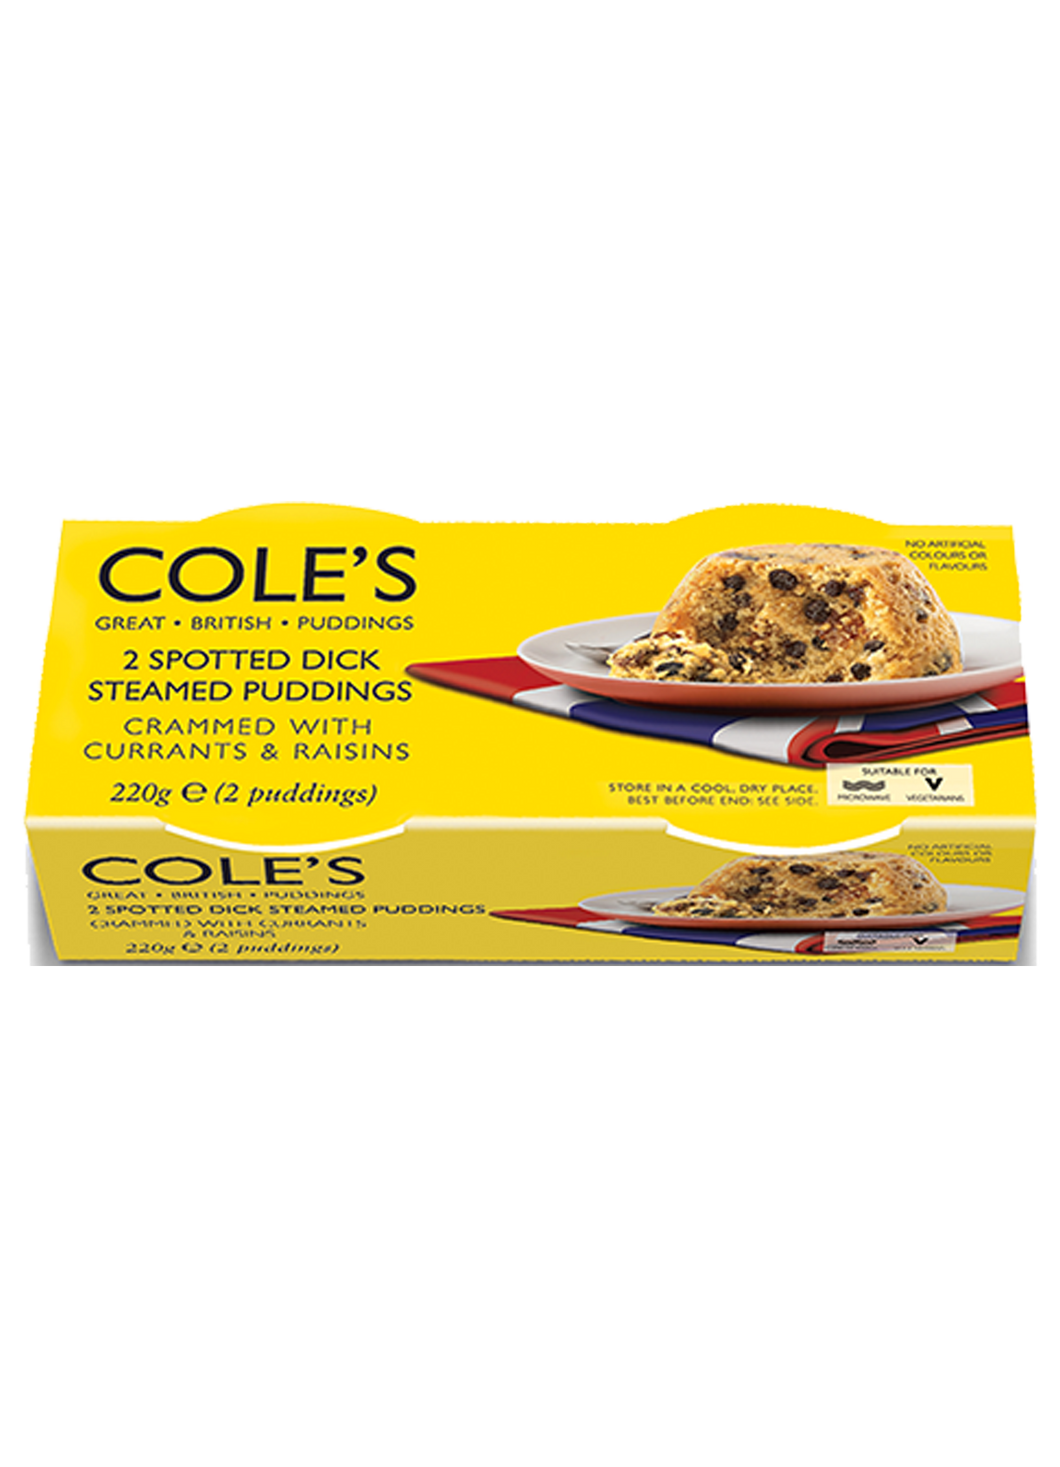 Cole's 2 Spotted Dick Steamed Puddings 220g